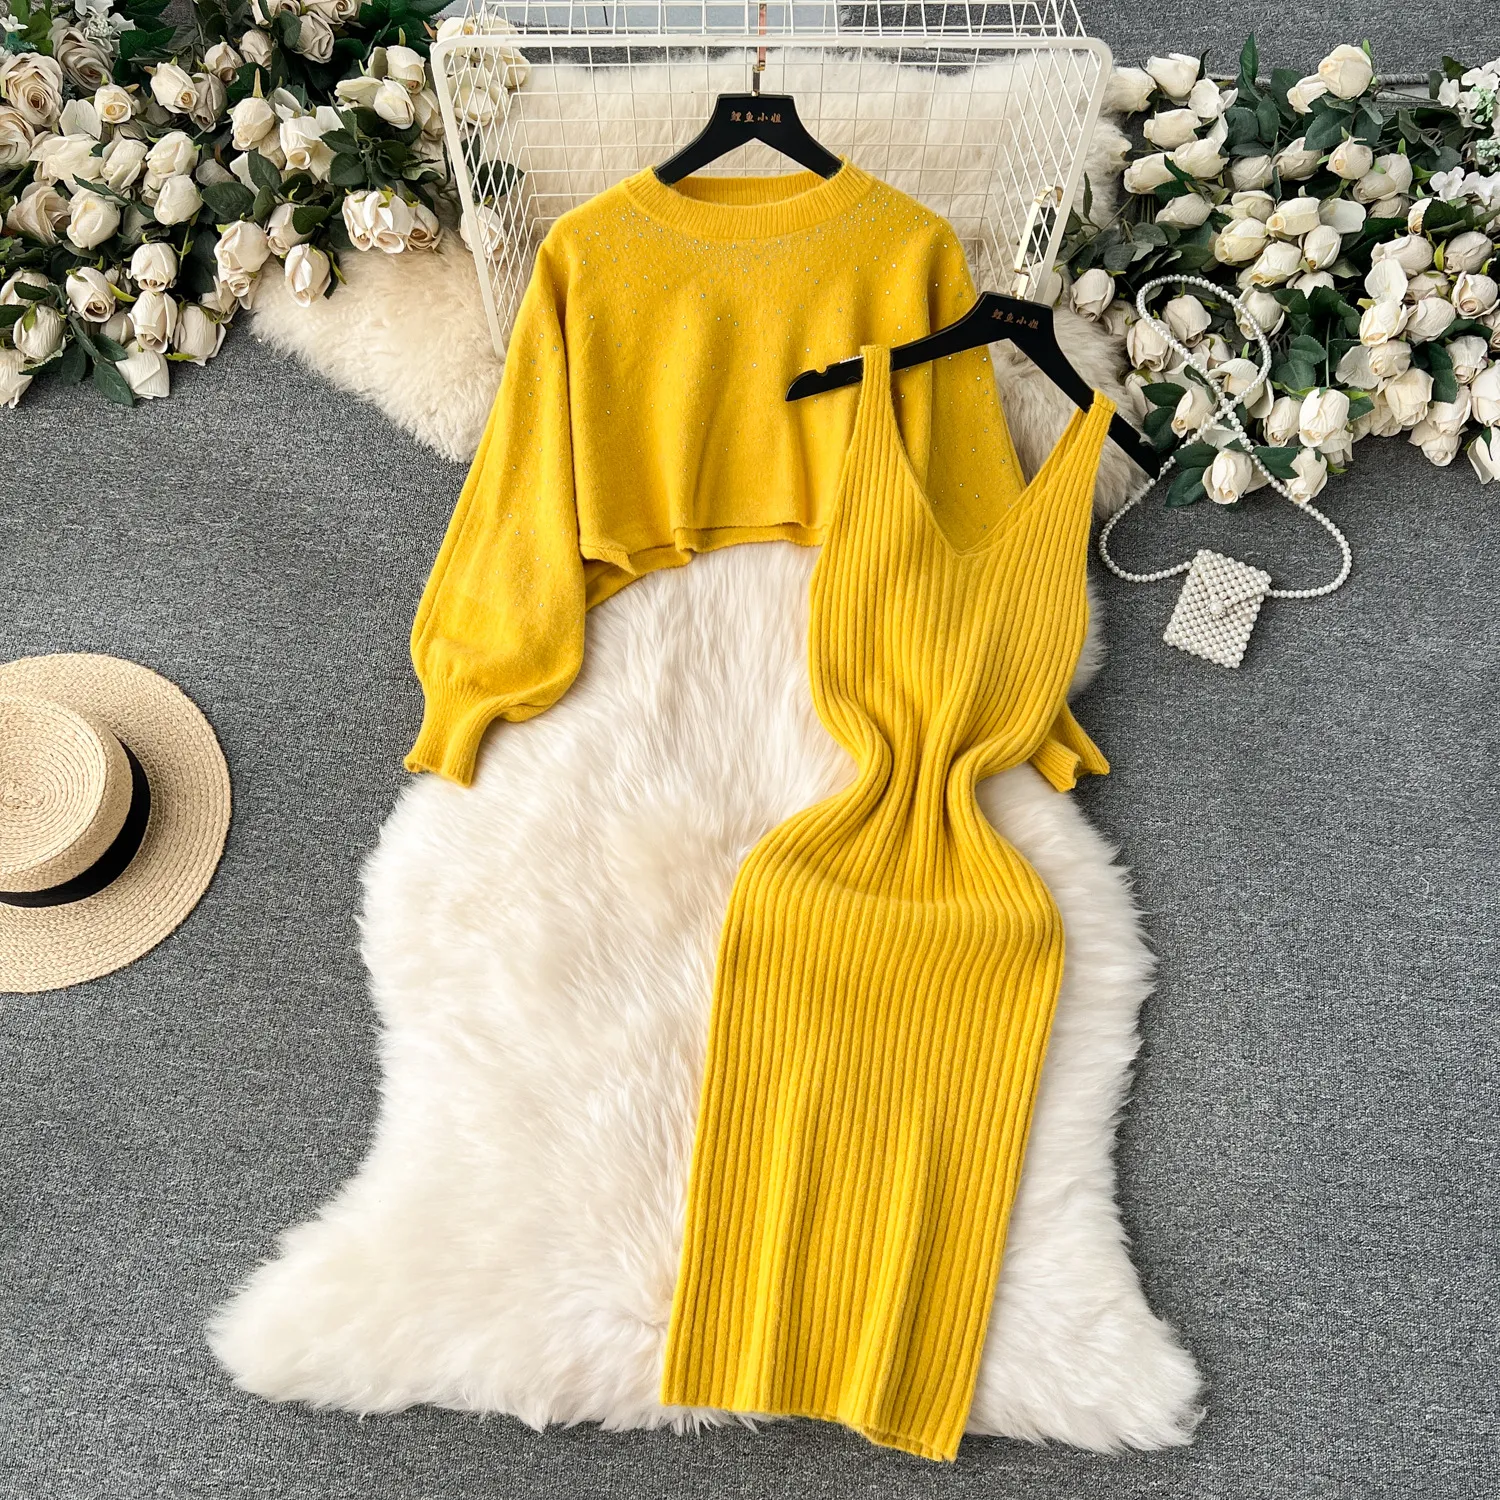 Sweater Women's Winter Fashion Set Light Luxury Hot Rolled Diamond Bubble Sleeve Cover Up Versatile Tank Top Dress Knitted Two Piece Set